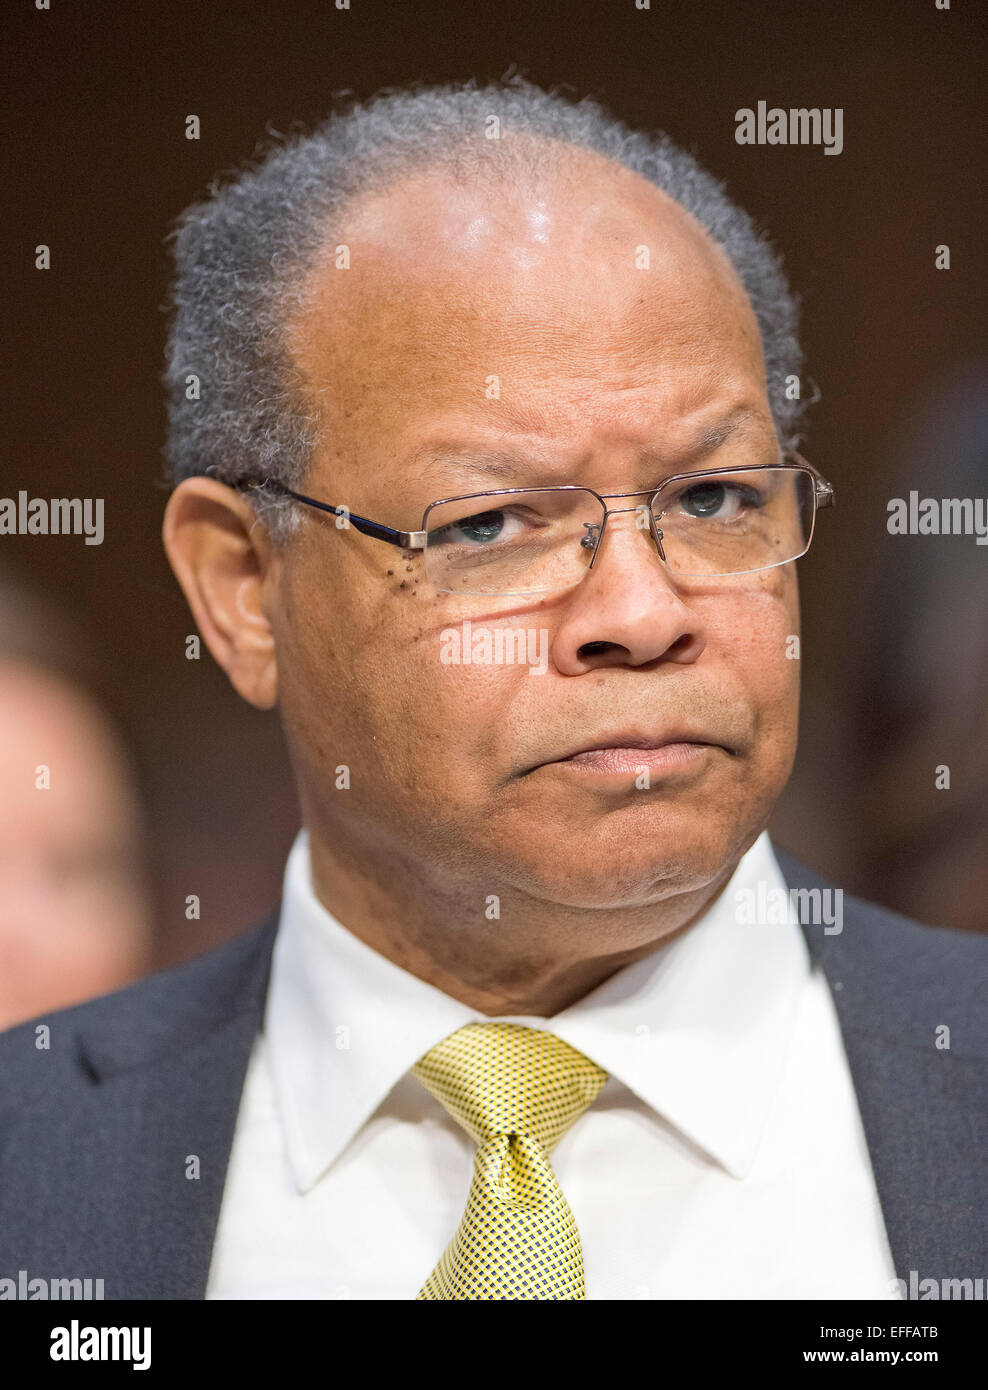 The Reverend Doctor Clarence Newsome, President of the National Underground Railroad Freedom Center in Cincinnati, Ohio testifies during the United States Senate Committee on the Judiciary hearing on the confirmation of Loretta Lynch, United States Attorney For The Eastern District Of New York, U.S. Department of Justice, Brooklyn, NY as U.S. Attorney General on Capitol Hill in Washington, D.C. on Thursday, January 29, 2015. Credit: Ron Sachs / CNP /dpa - NO WIRE SERVICE - Stock Photo